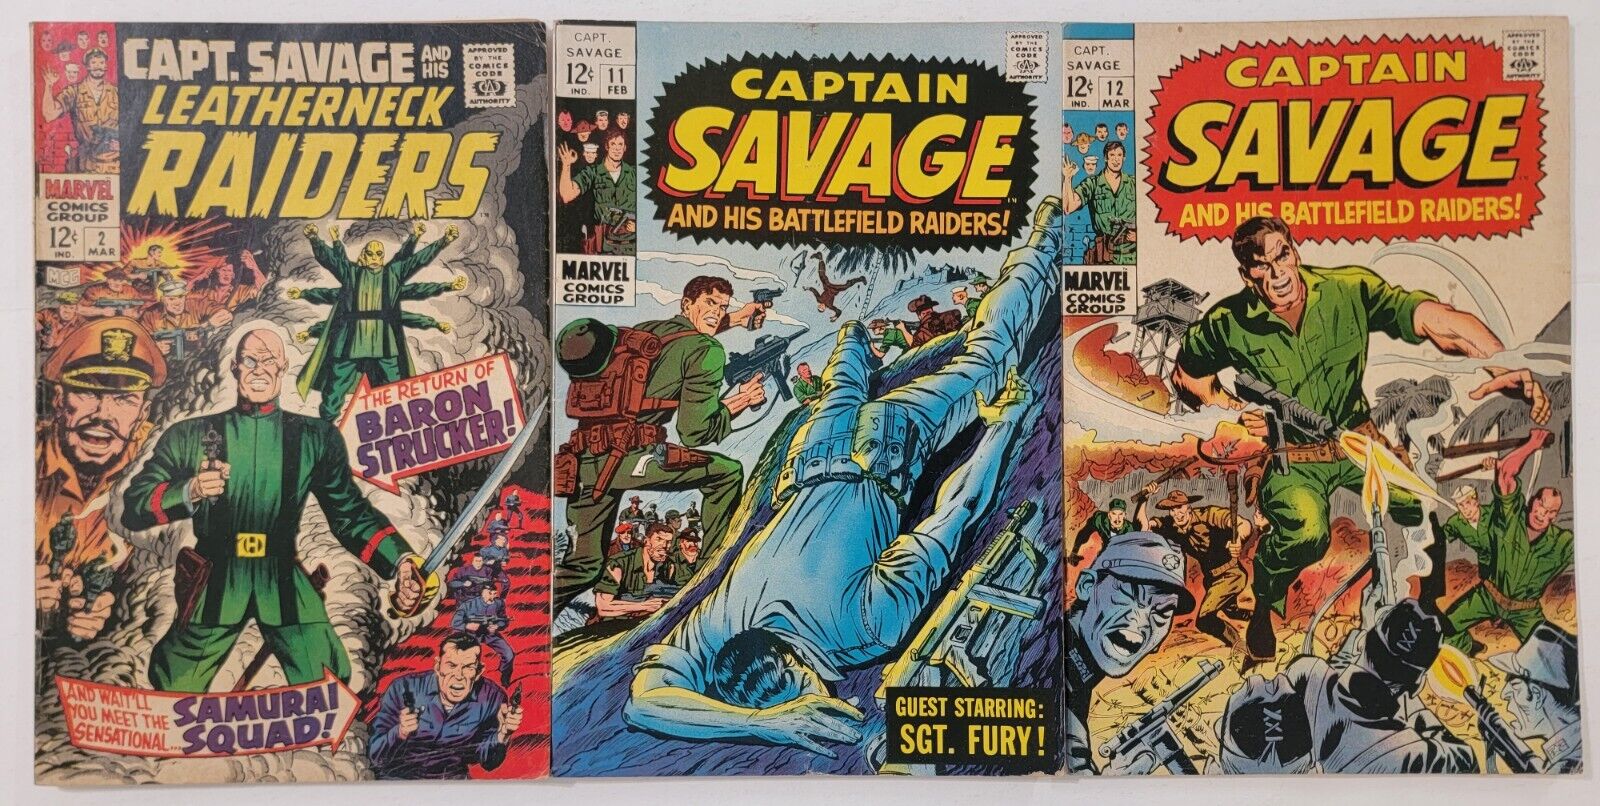 CAPTAIN SAVAGE AND HIS LEATHERNECK RAIDERS Lot (3) 2,11 &12 VG/FN VINTAGE Silver